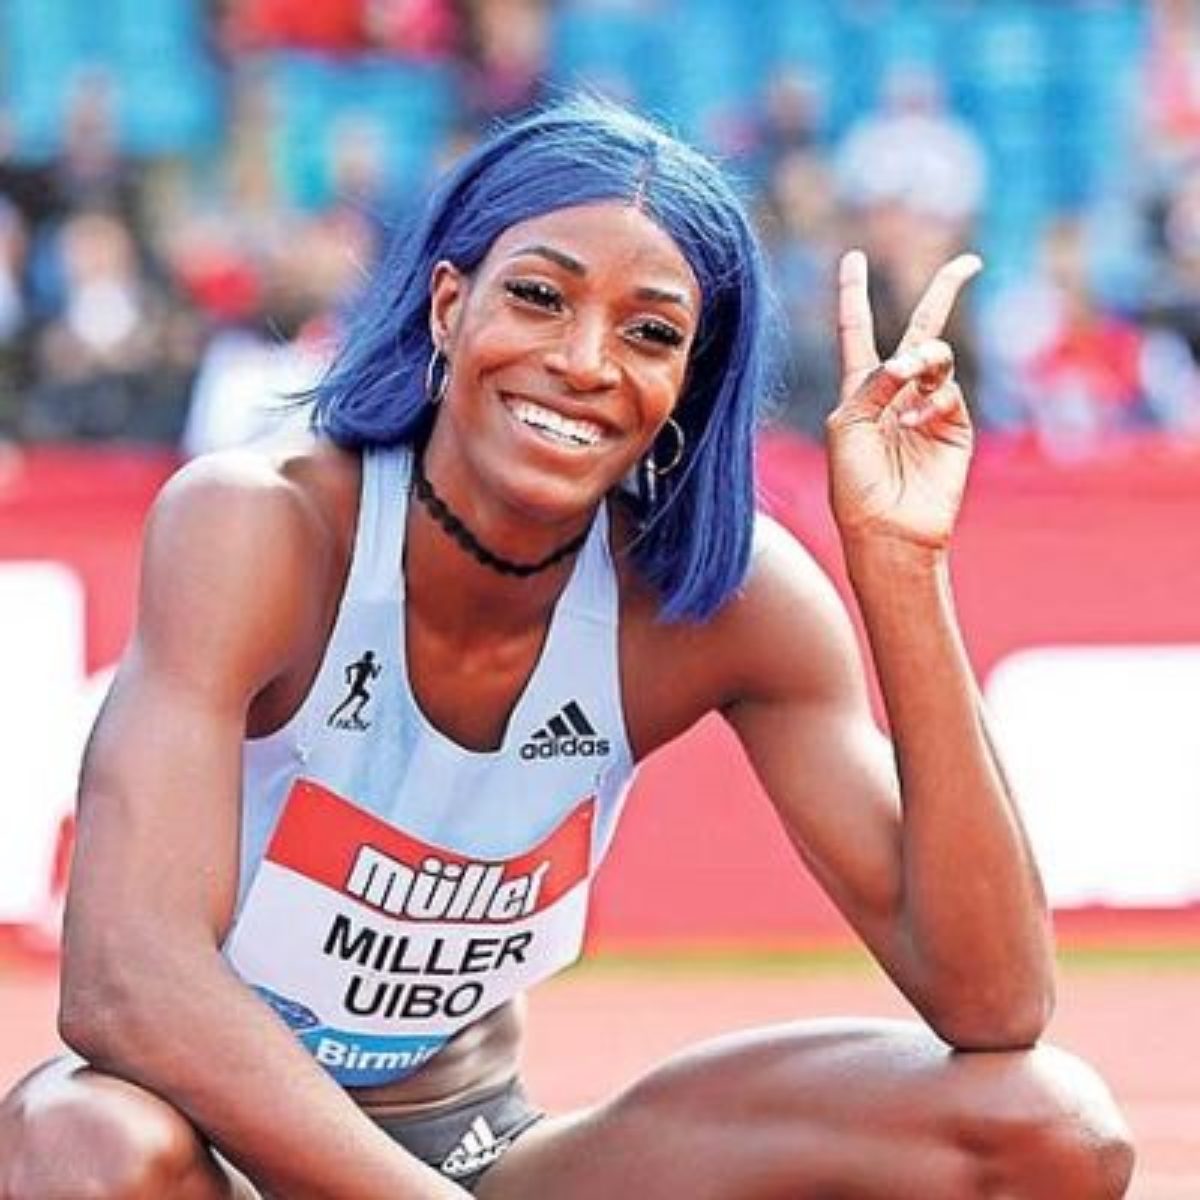 The 27-year old daughter of father (?) and mother(?) Shaunae Miller-Uibo in 2022 photo. Shaunae Miller-Uibo earned a  million dollar salary - leaving the net worth at  million in 2022